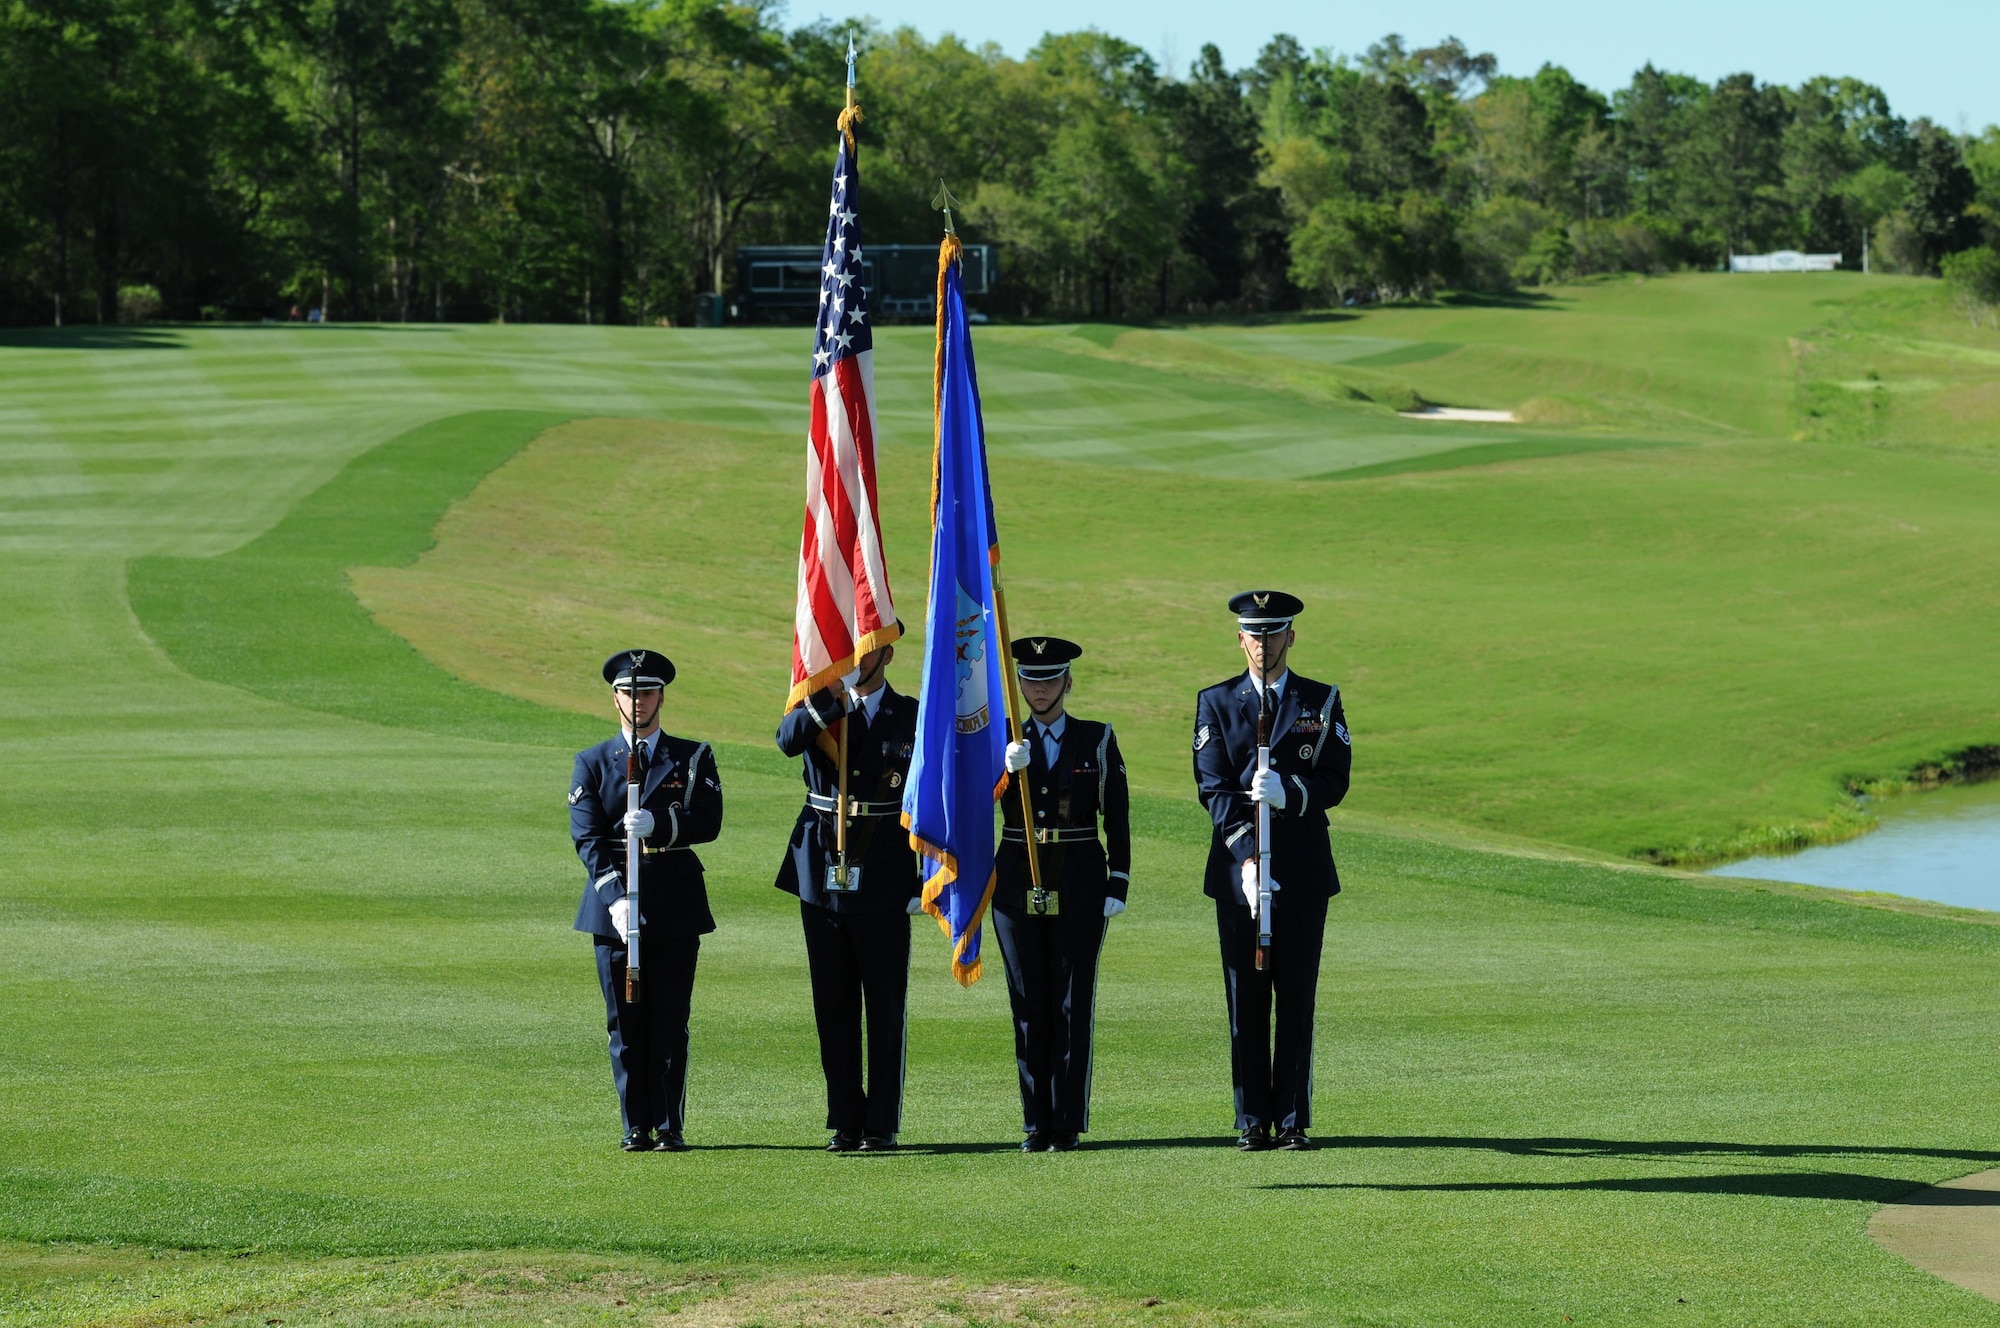 Members of the Keesler Honor Guard post the colors during the signing of the national anthem during the Mississippi Gulf Resort Classic closing ceremonies at the Fallen Oak Golf Course April 3, 2016. Col. Michele Edmondson, 81st Training Wing commander, and Keesler Airmen also participated in the festivities. (U.S. Air Force photo by Kemberly Groue)